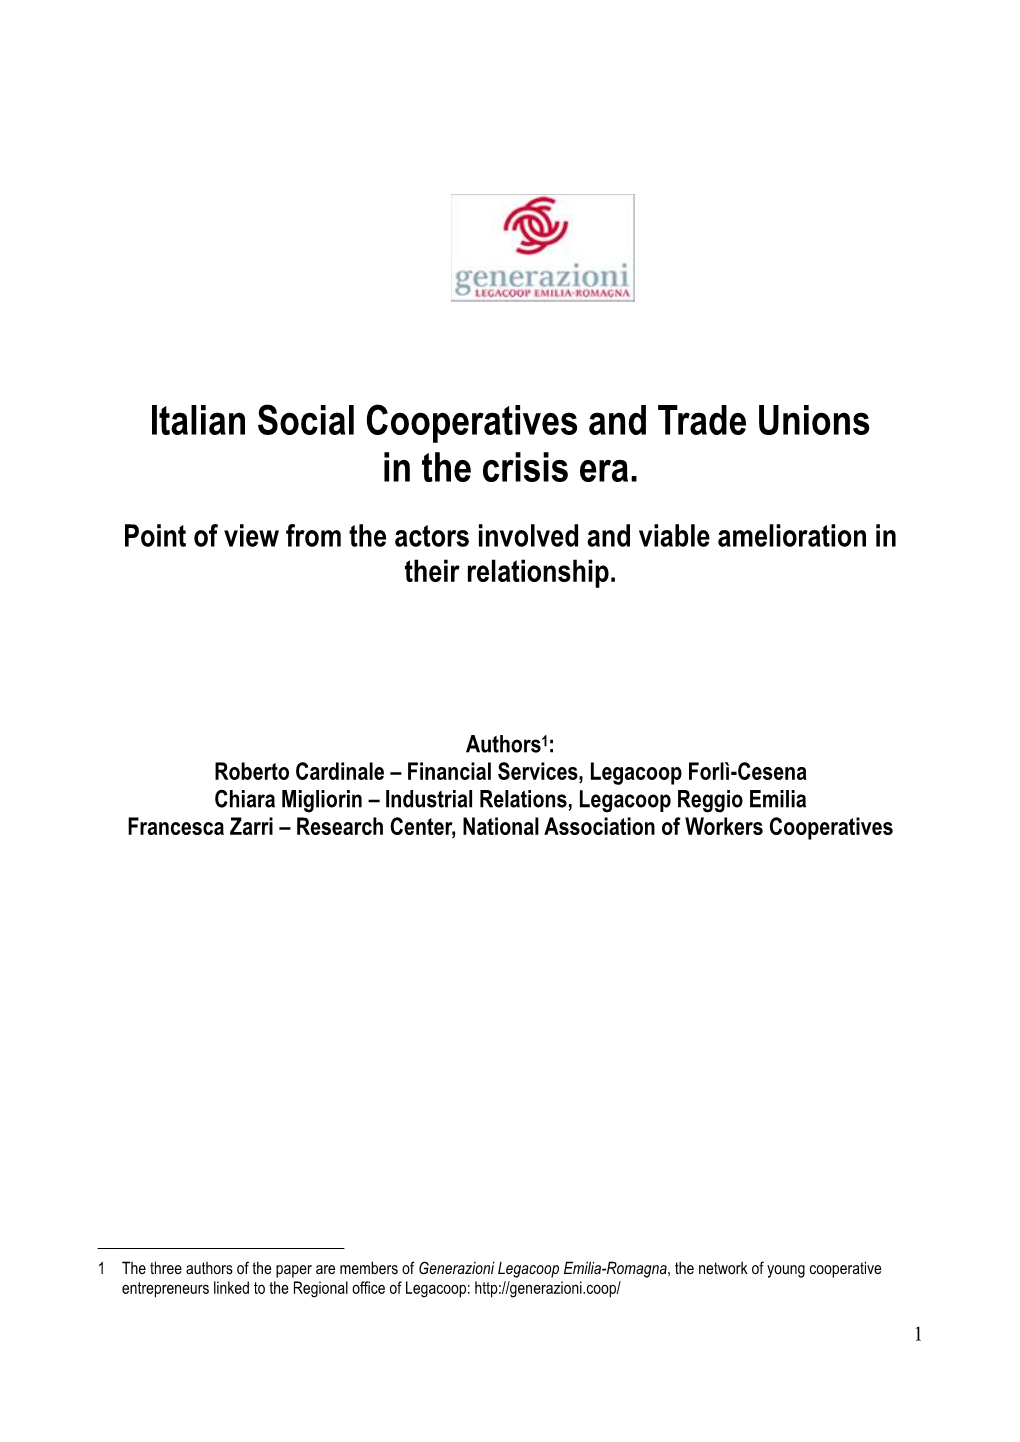 Italian Social Cooperatives and Trade Unions in the Crisis Areapdf